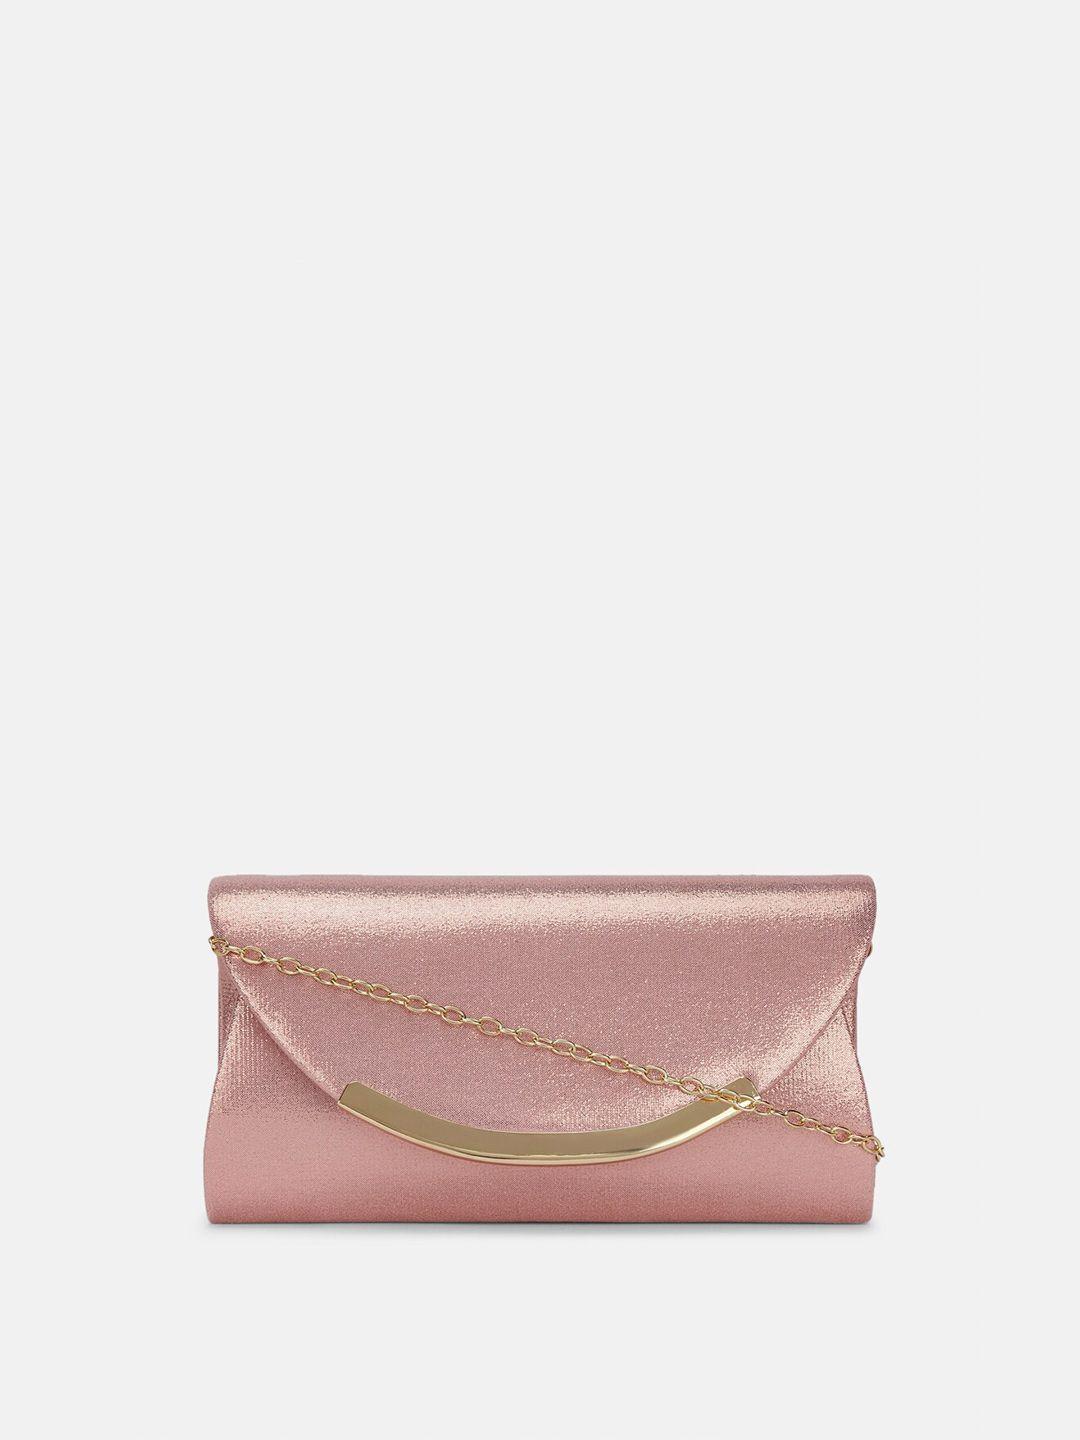 forever glam by pantaloons rose gold box clutch